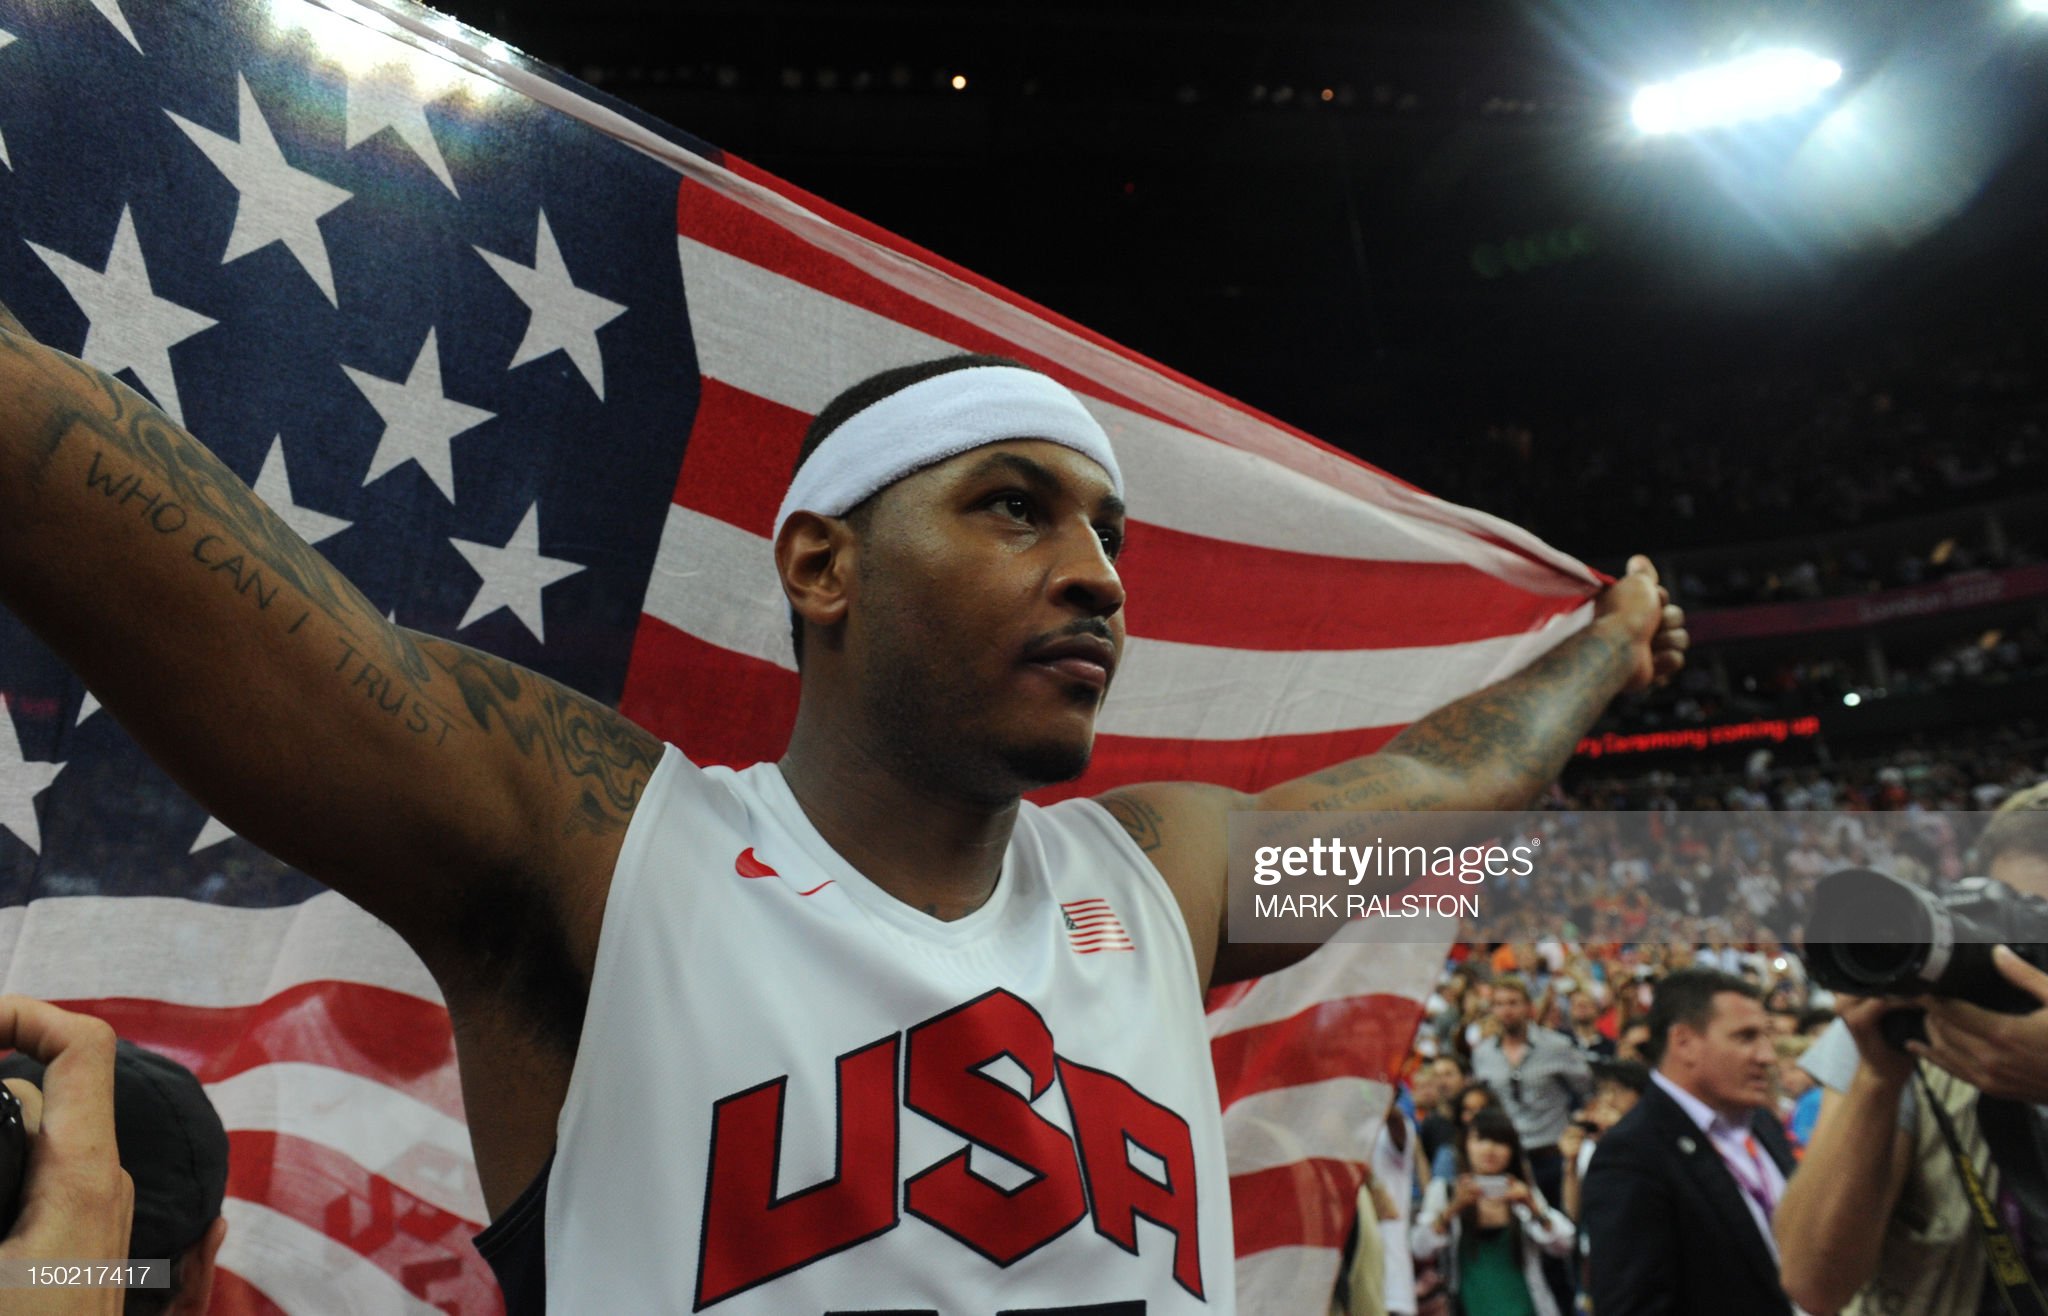 Carmelo Anthony still wants to be traded – The Denver Post